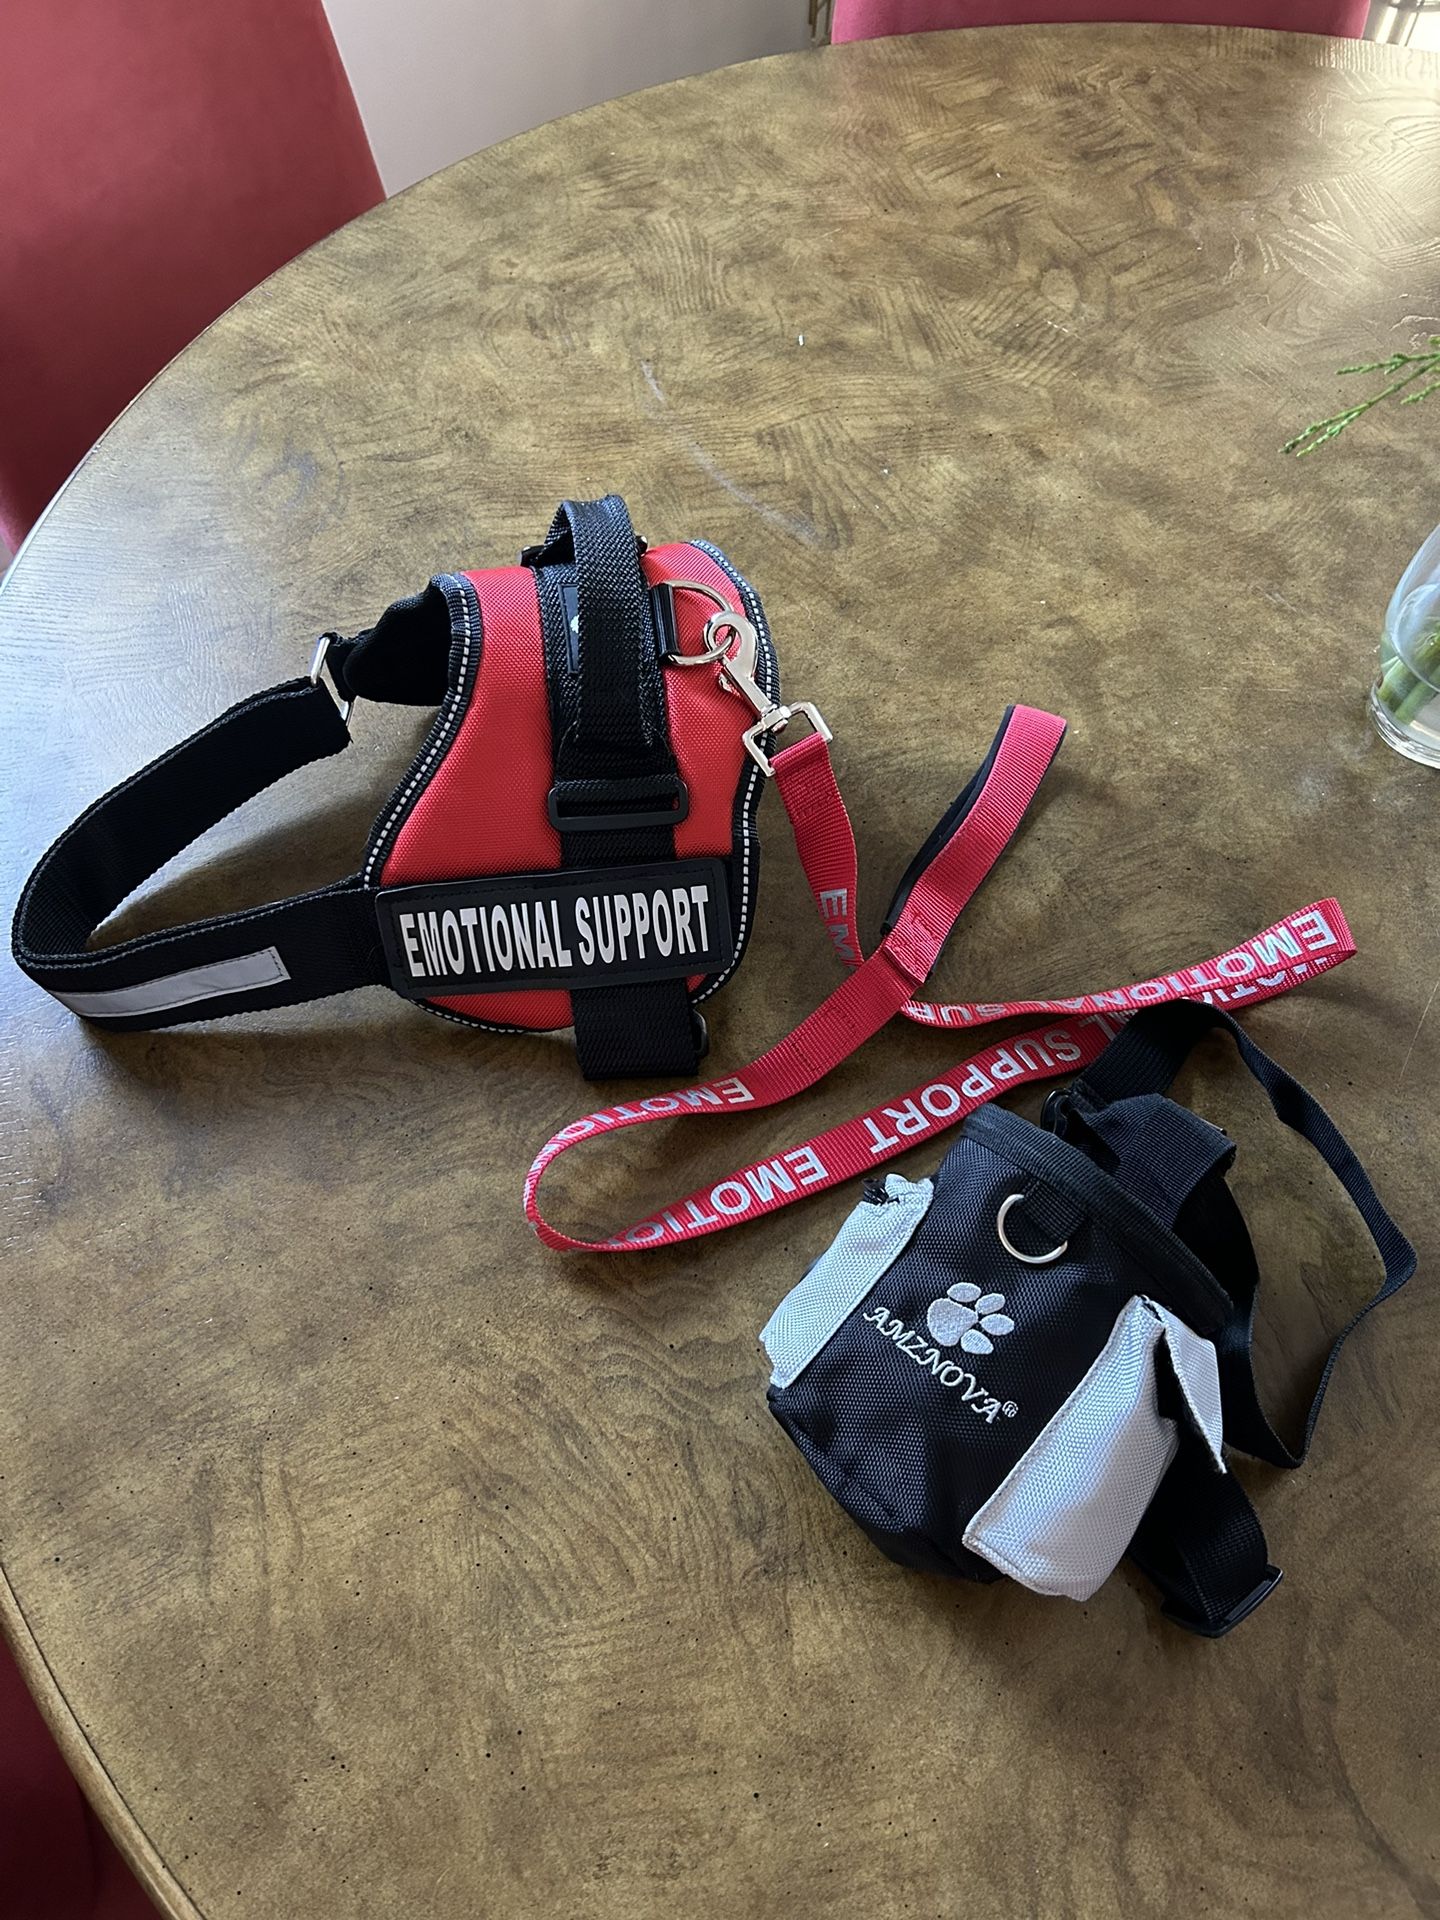 Emotional Support Harness And Leash + Dog Treat Bag